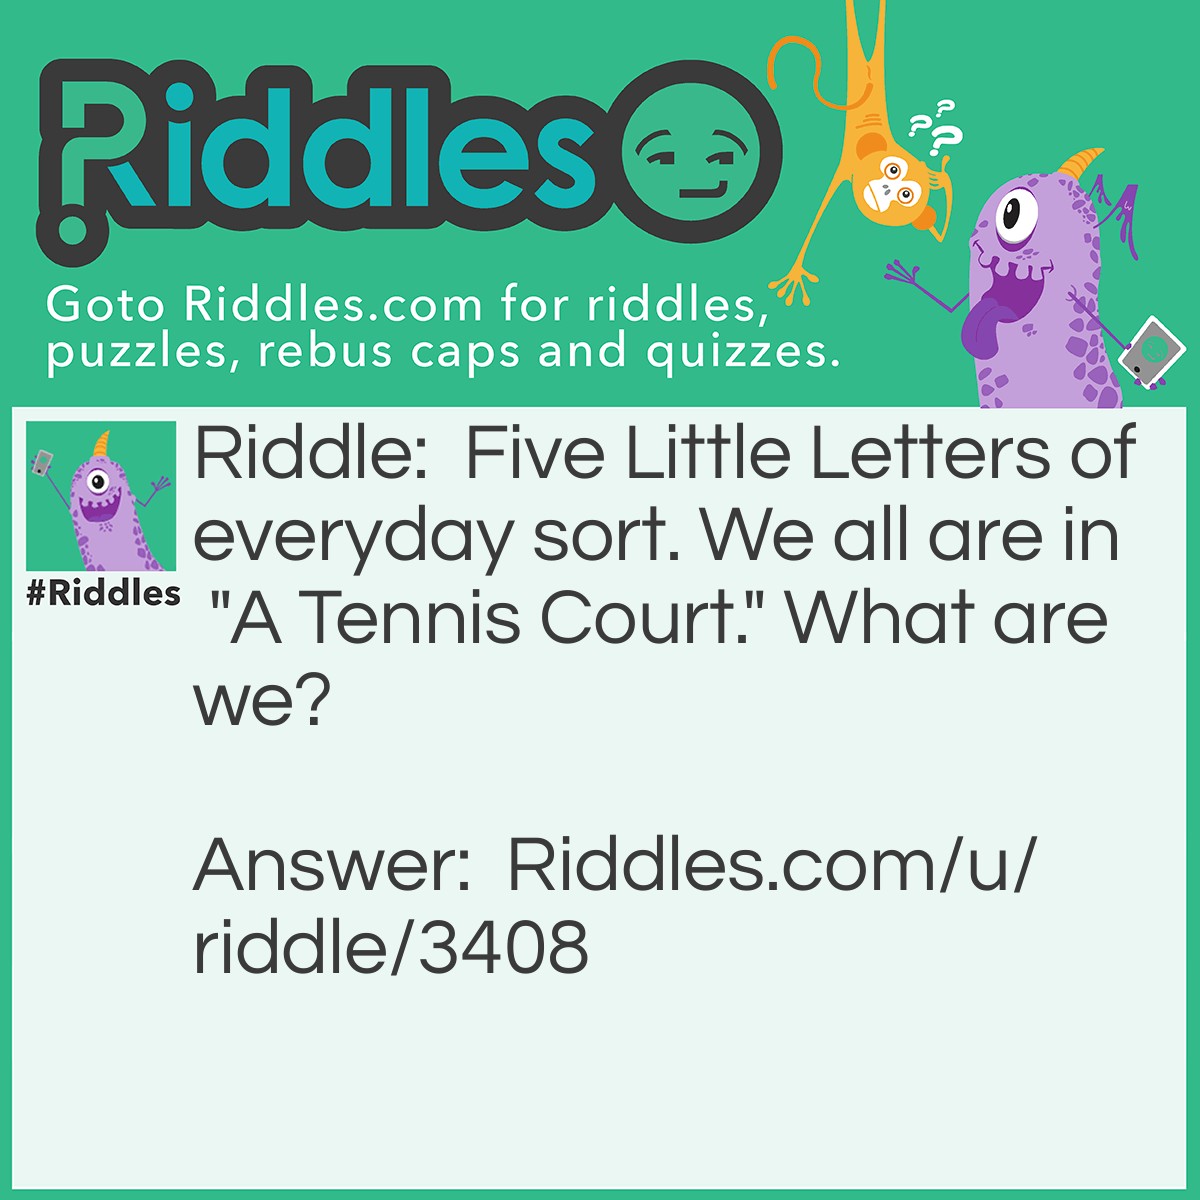 Riddle: Five Little Letters of everyday sort. We all are in "A Tennis Court." What are we? Answer: Vowels.